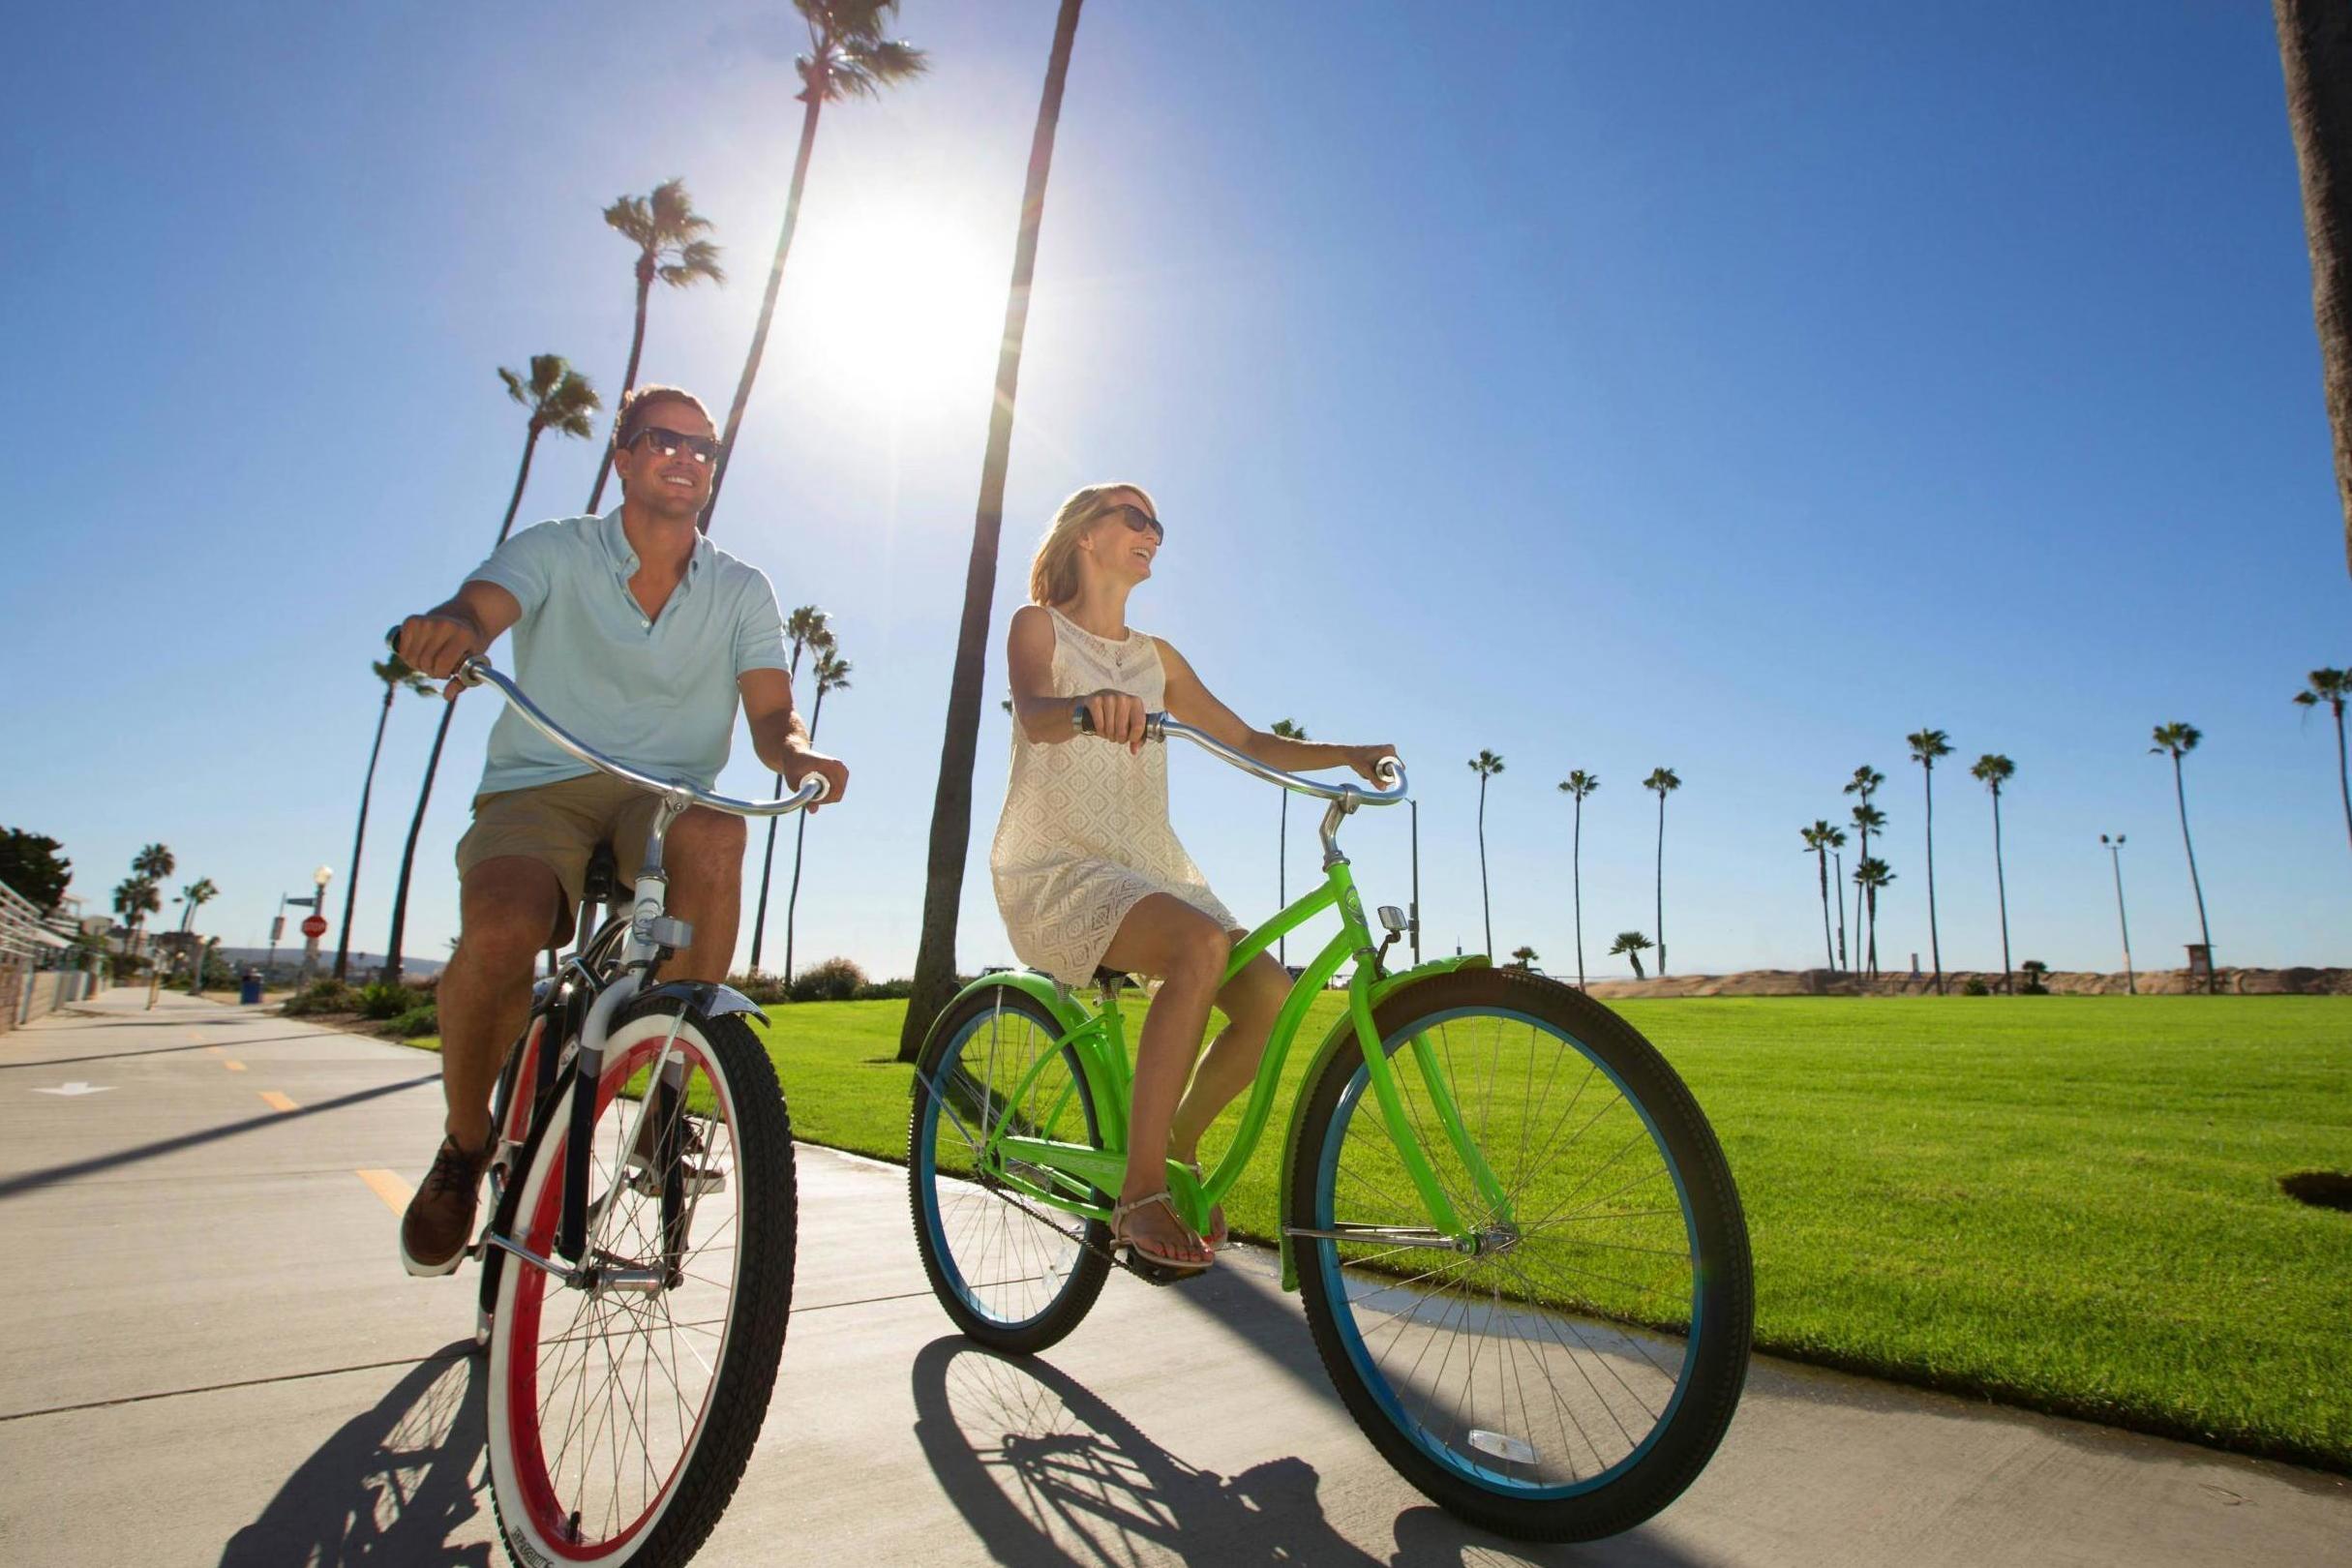 An electric bike is the easiest way to explore